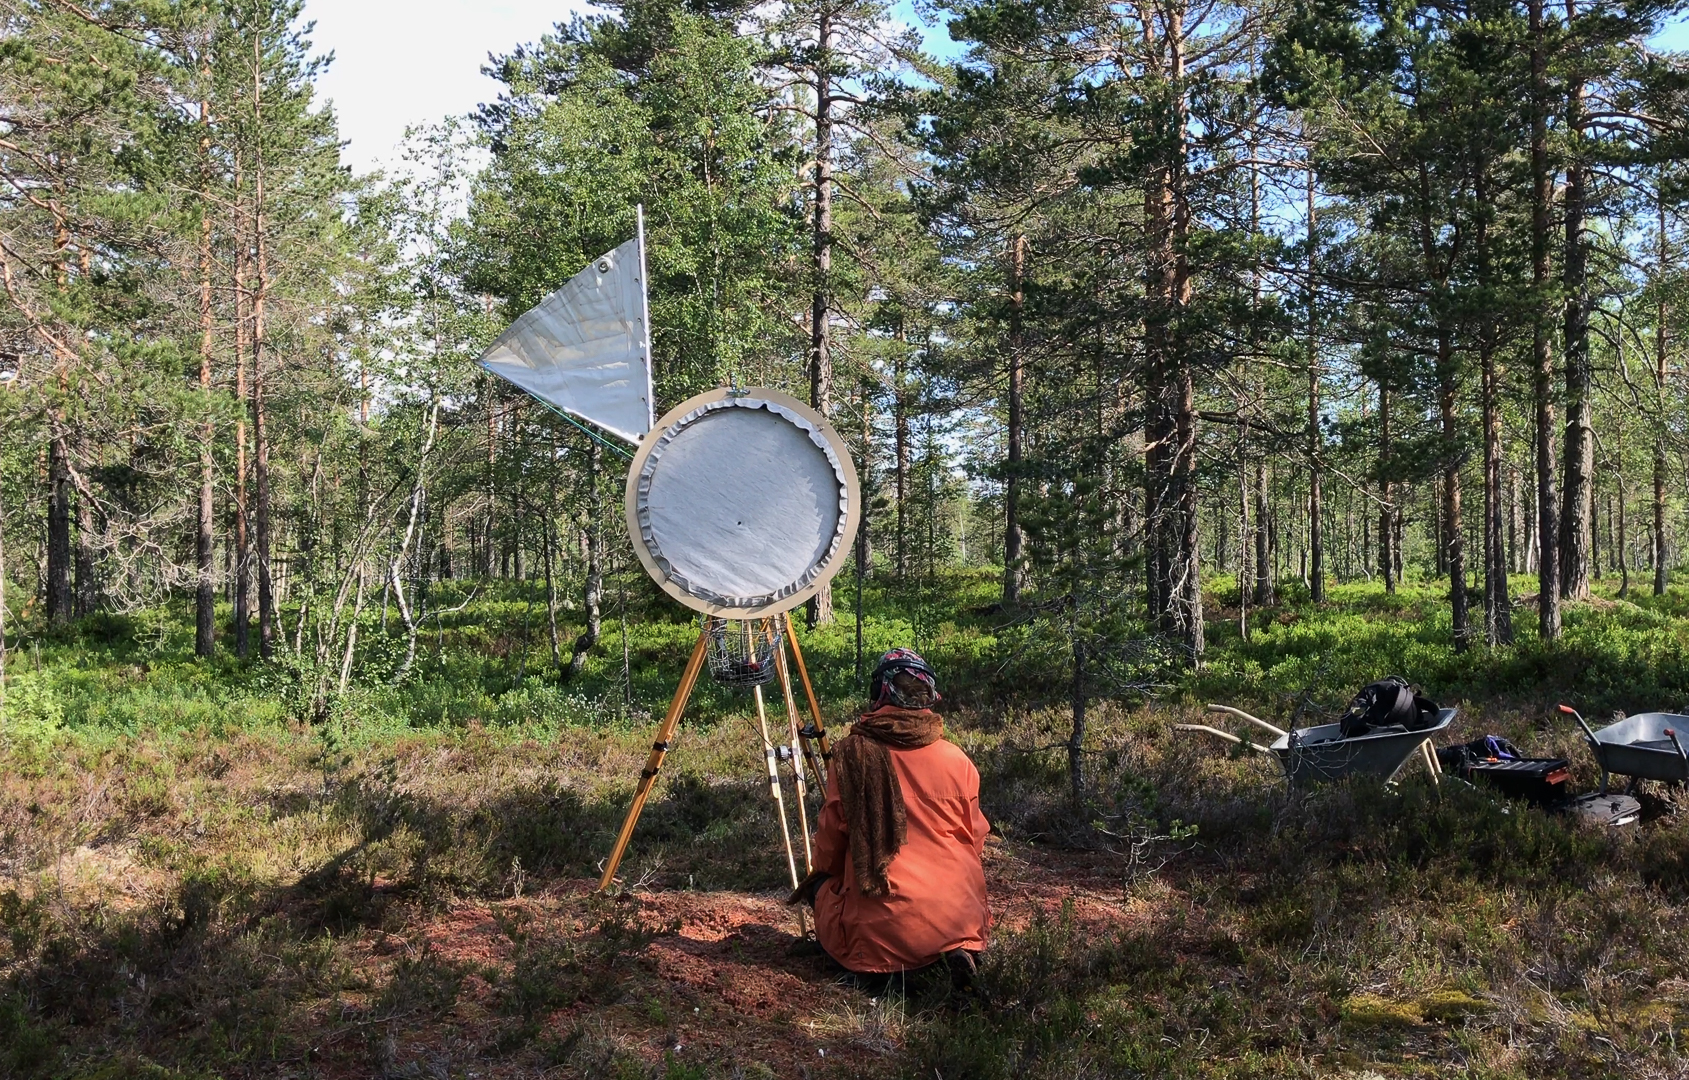 Photo of a forset landscape with an aparatus on the middel with a cricle and a triangle, and a person sitting on the ground. From video artwork by Røed.